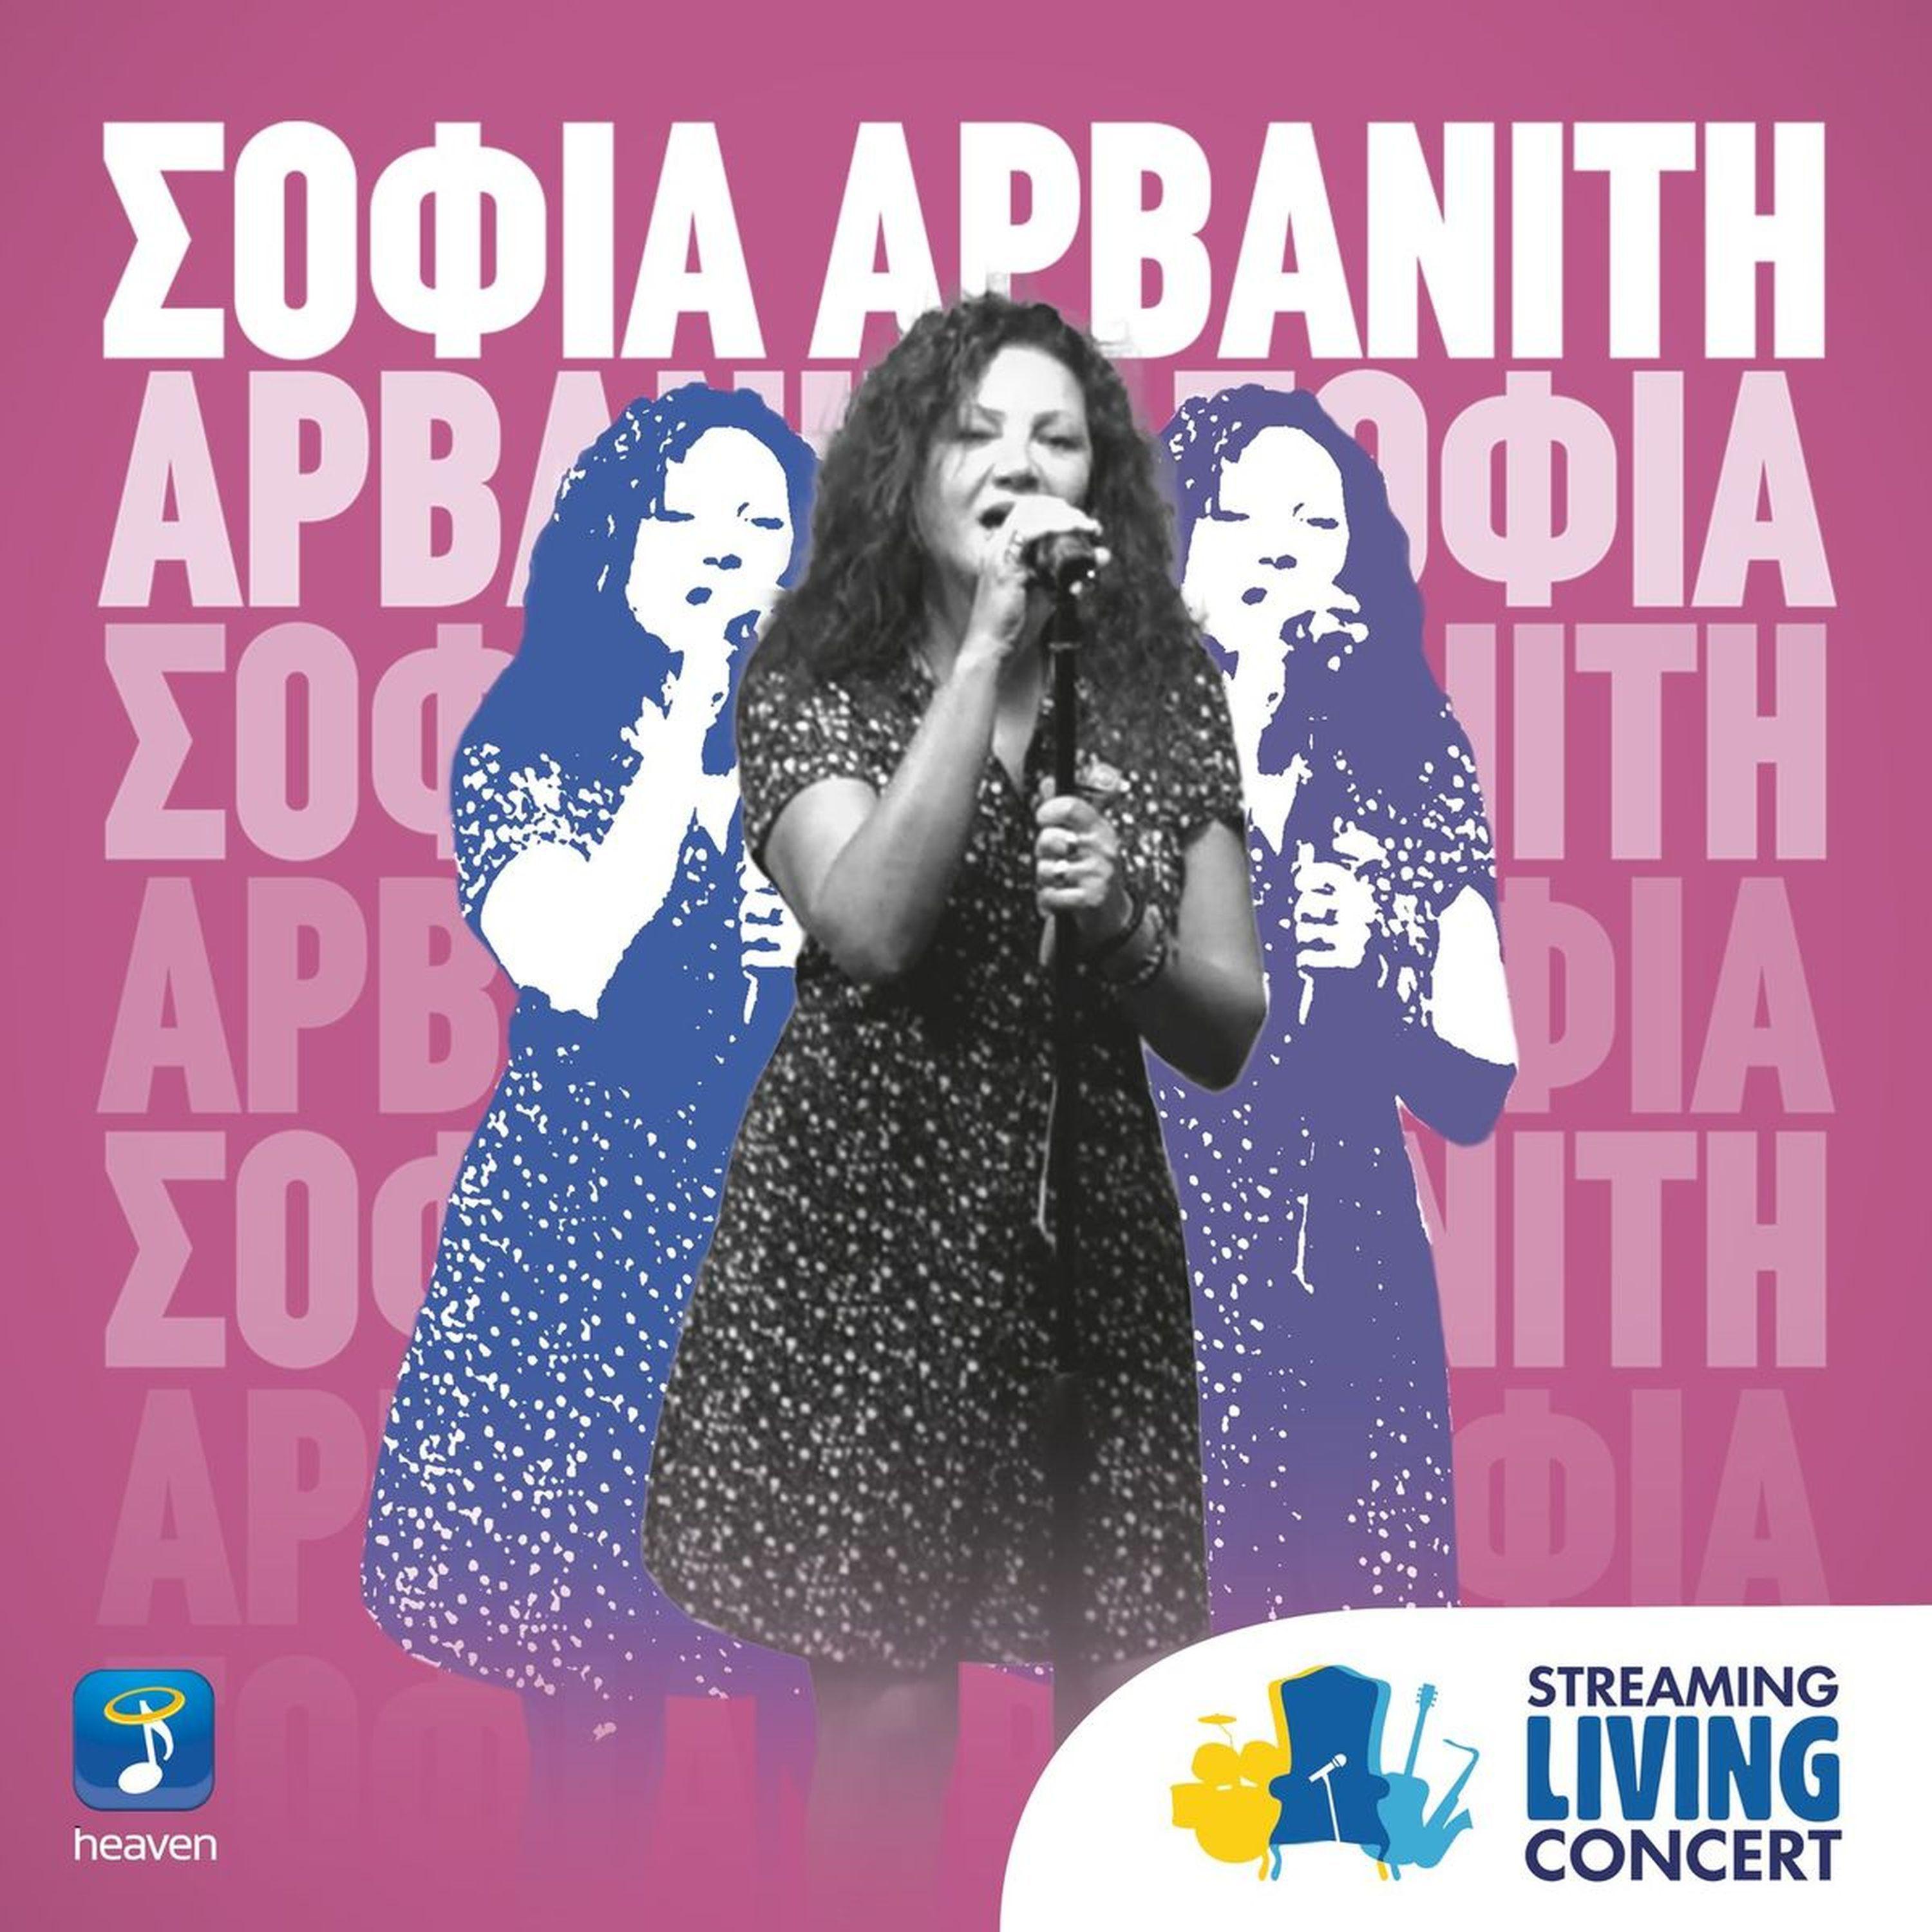 Sofia Arvaniti - Lonely Day (Streaming Living Concert)